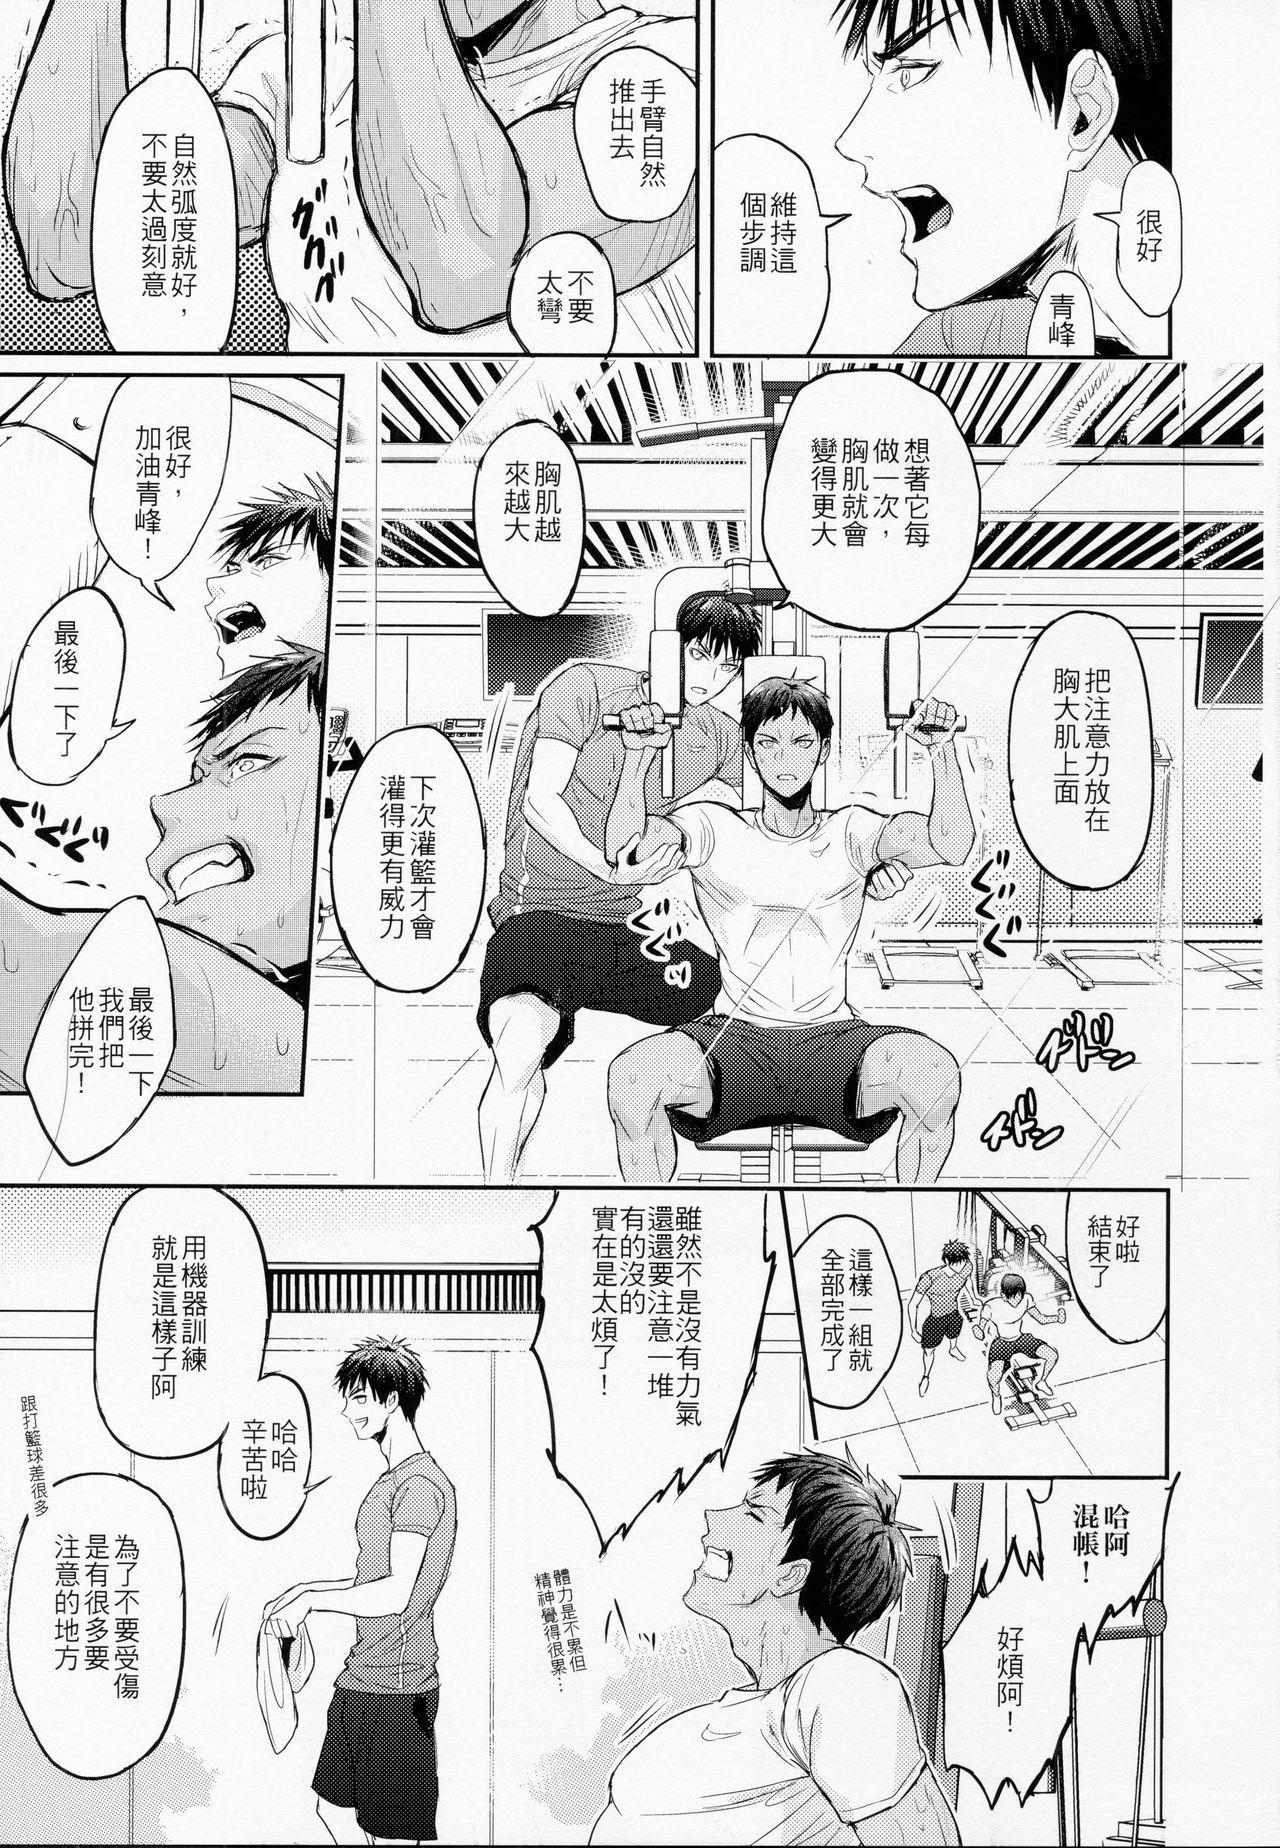 Dirty Talk This is how we WORK IT OUT - Kuroko no basuke Piercings - Page 4